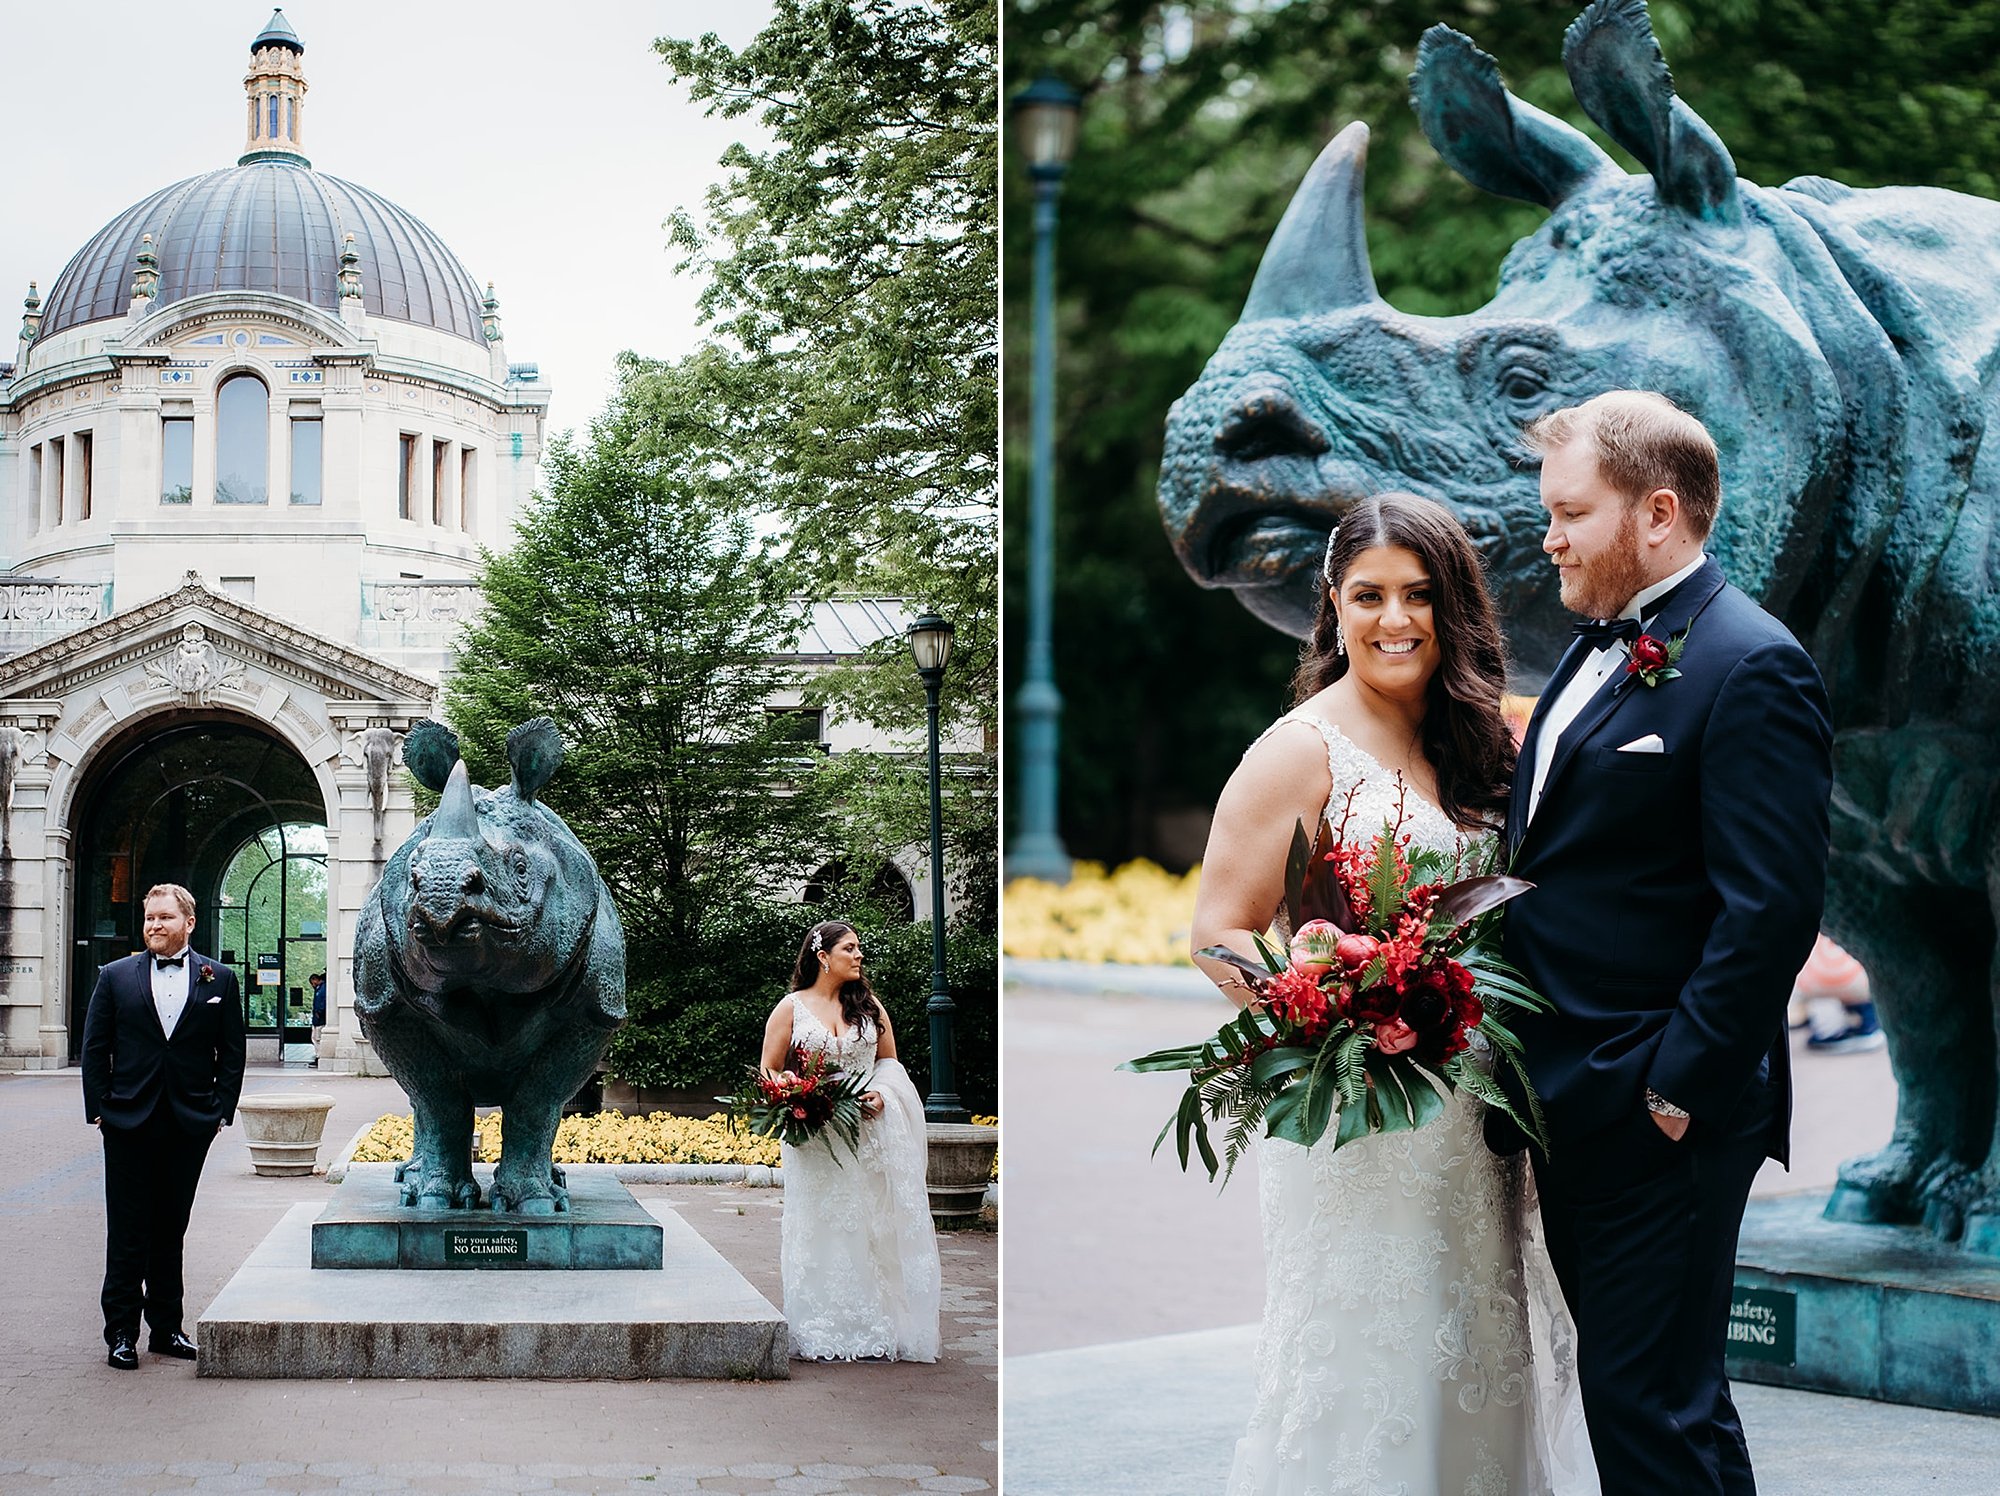 bride and groom smile together by rhino statute outside the Bronx Zoo